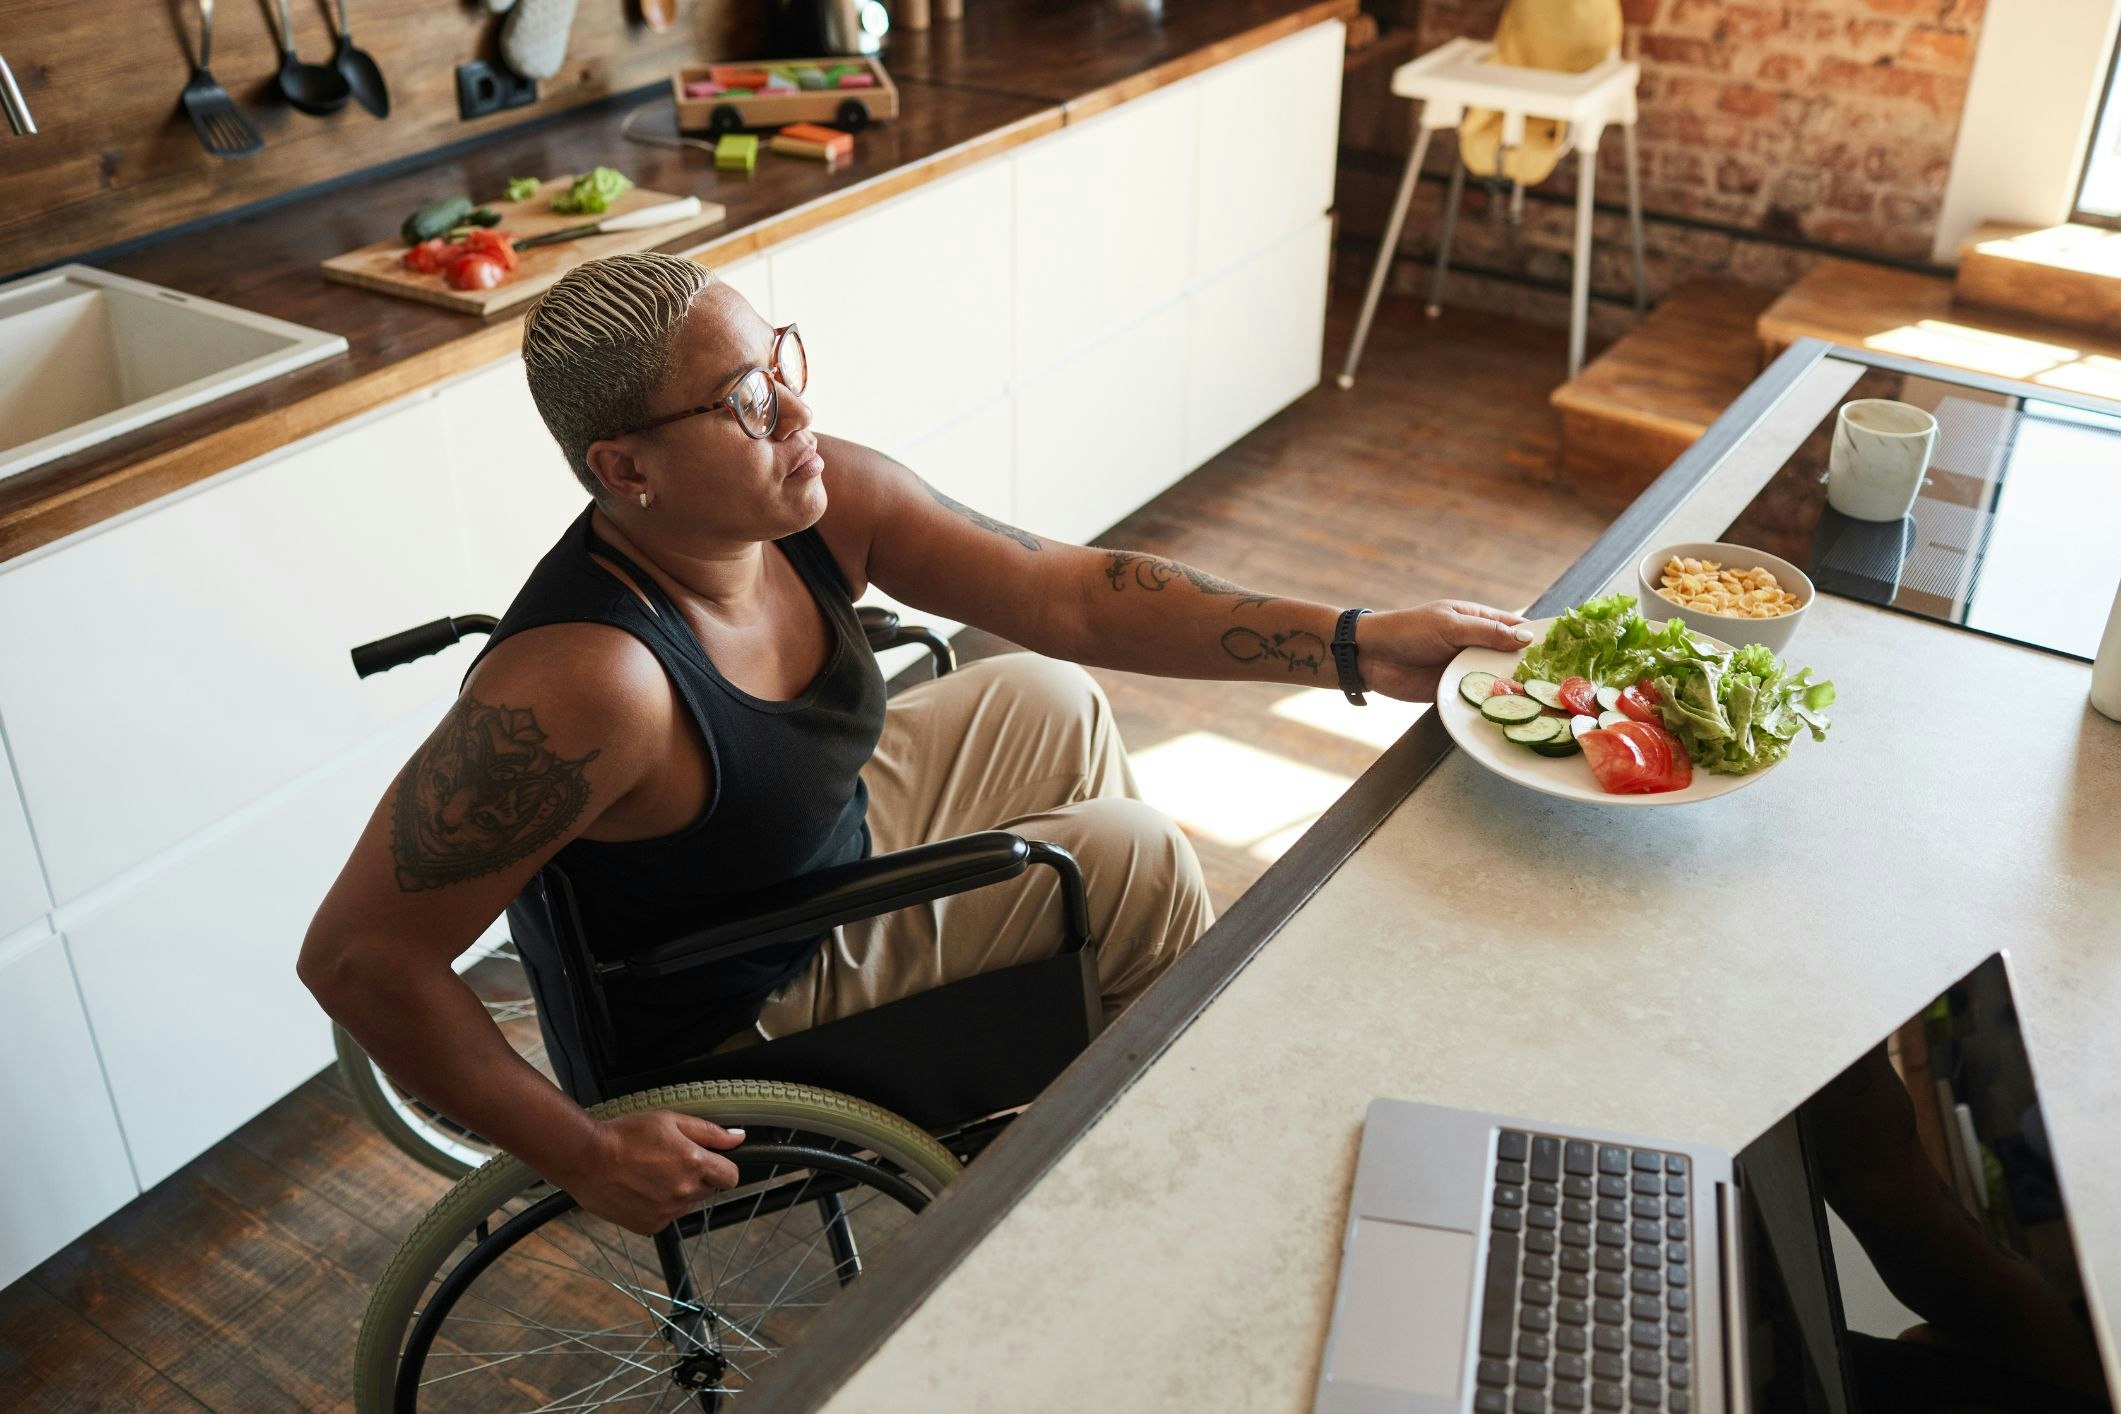 The role of an accredited practising dietitian (APD) covered by the NDIS is to ensure that the capacity and ability of a person who needs support for an impairment is taken into account. (Source: Shutterstock)
